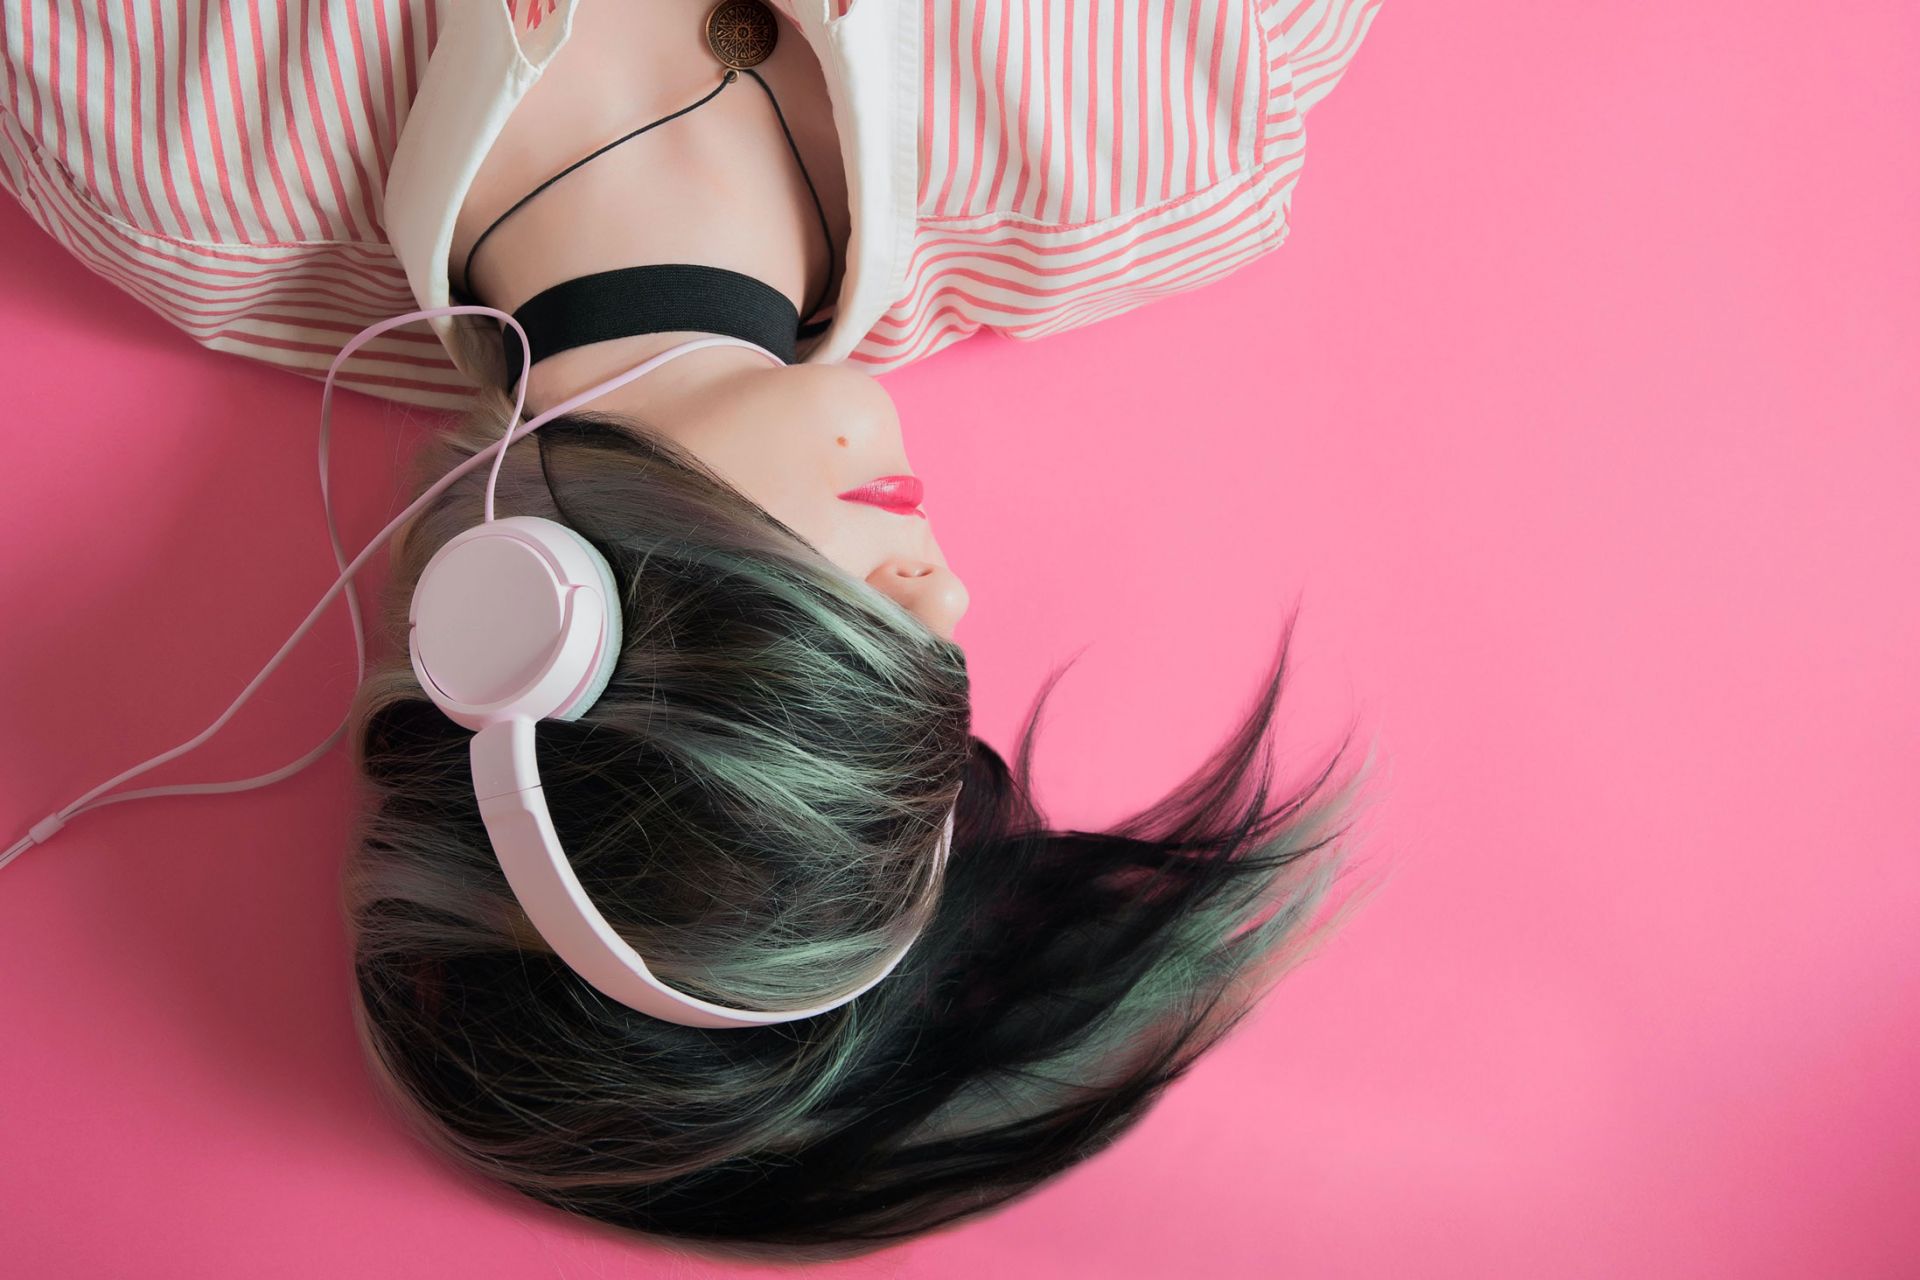 Woman lying down, pink background, hair covering her face and a pair of white headphones on